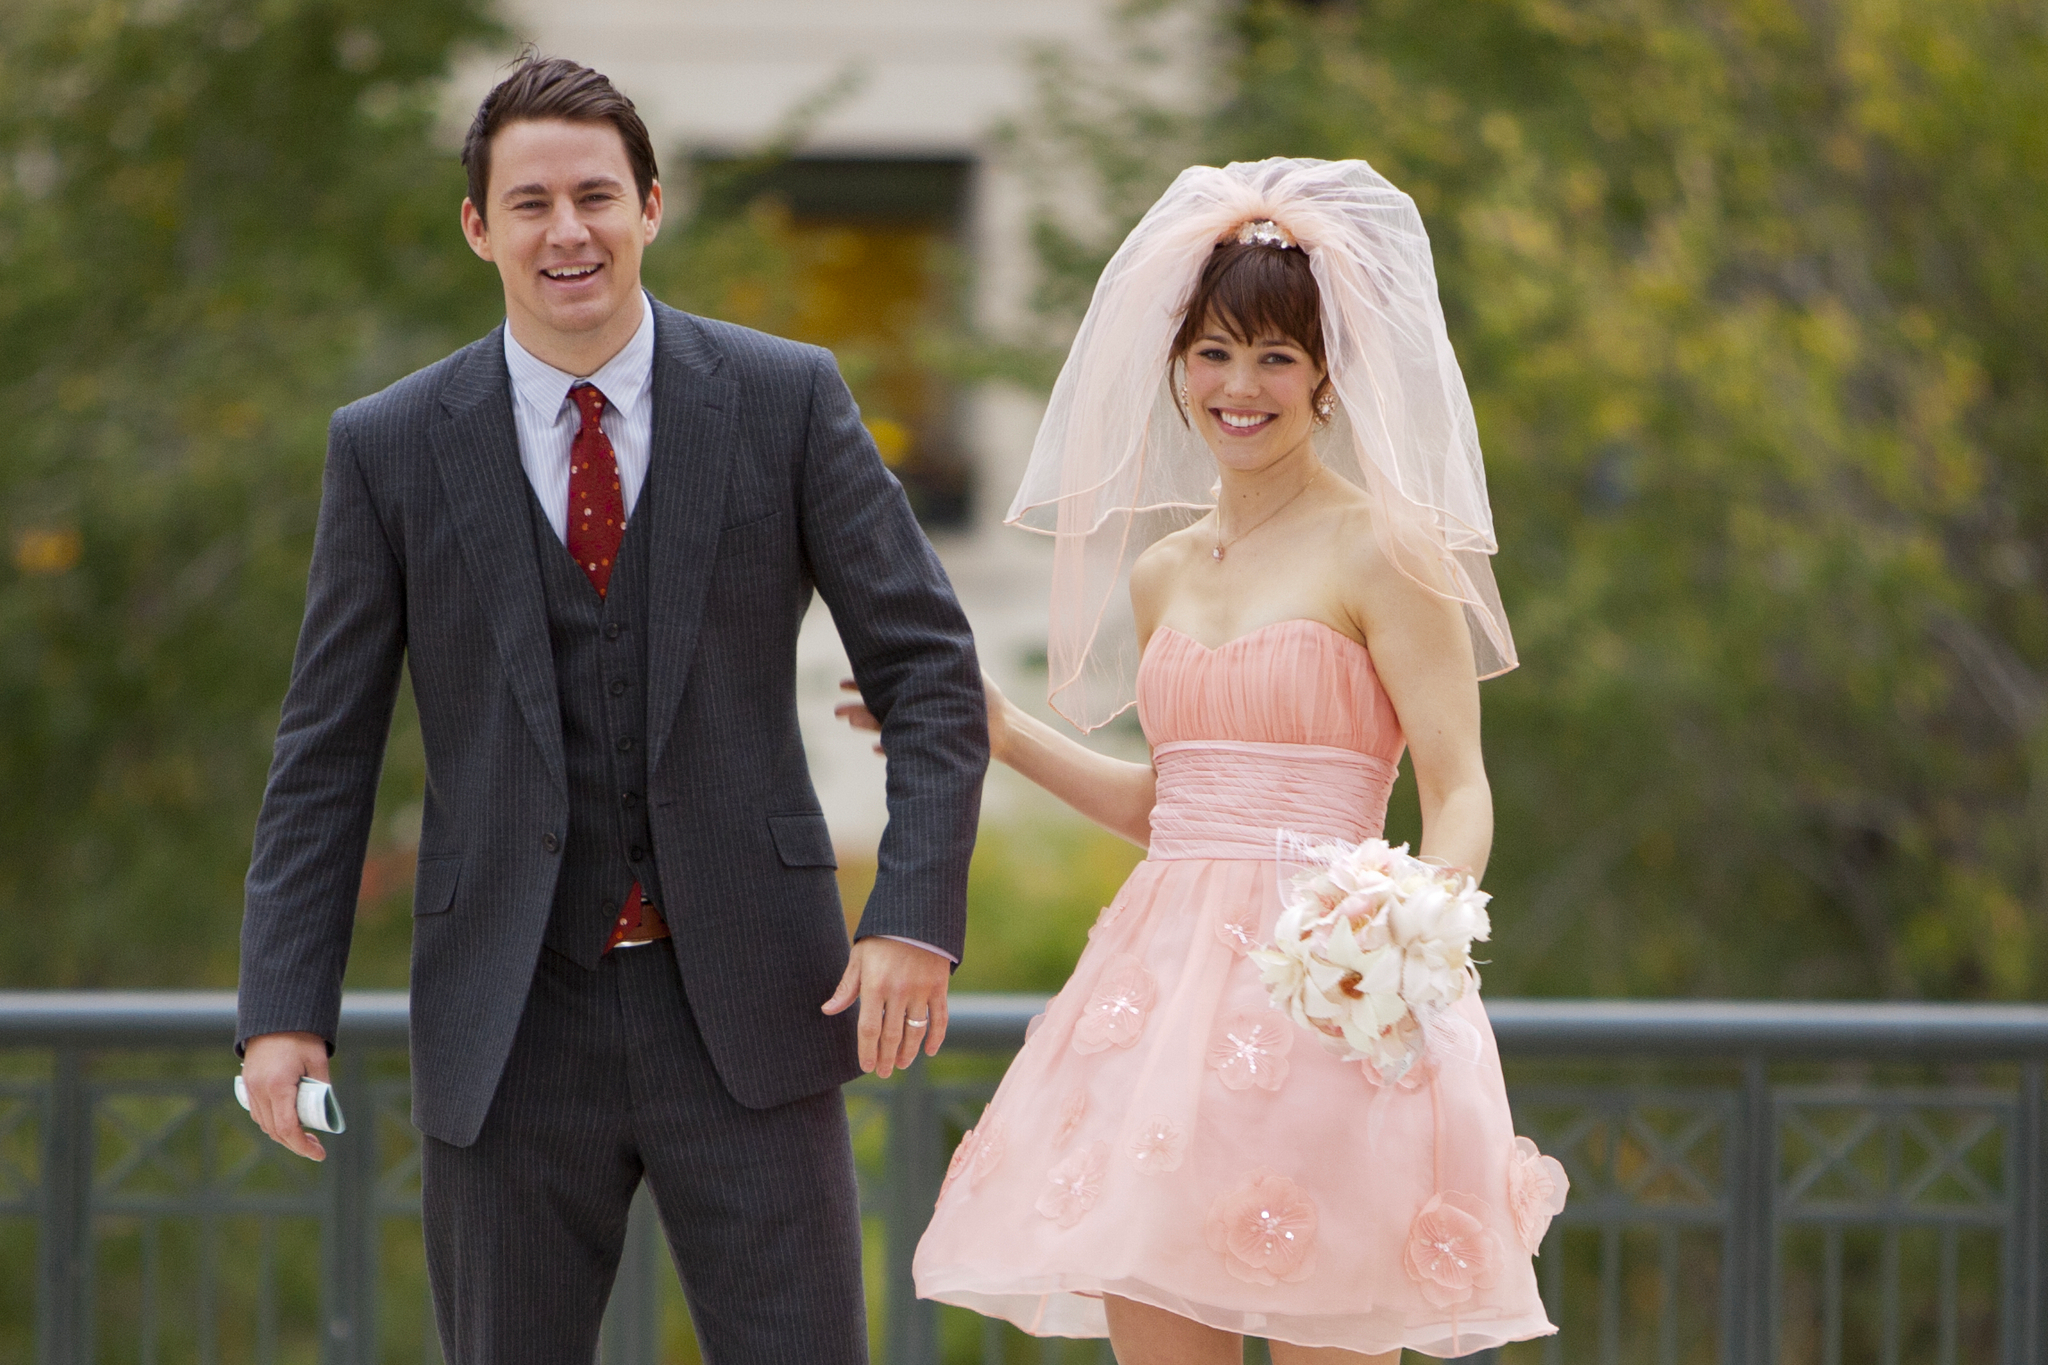 Paige and Leo are smiling on their wedding day in The Vow.